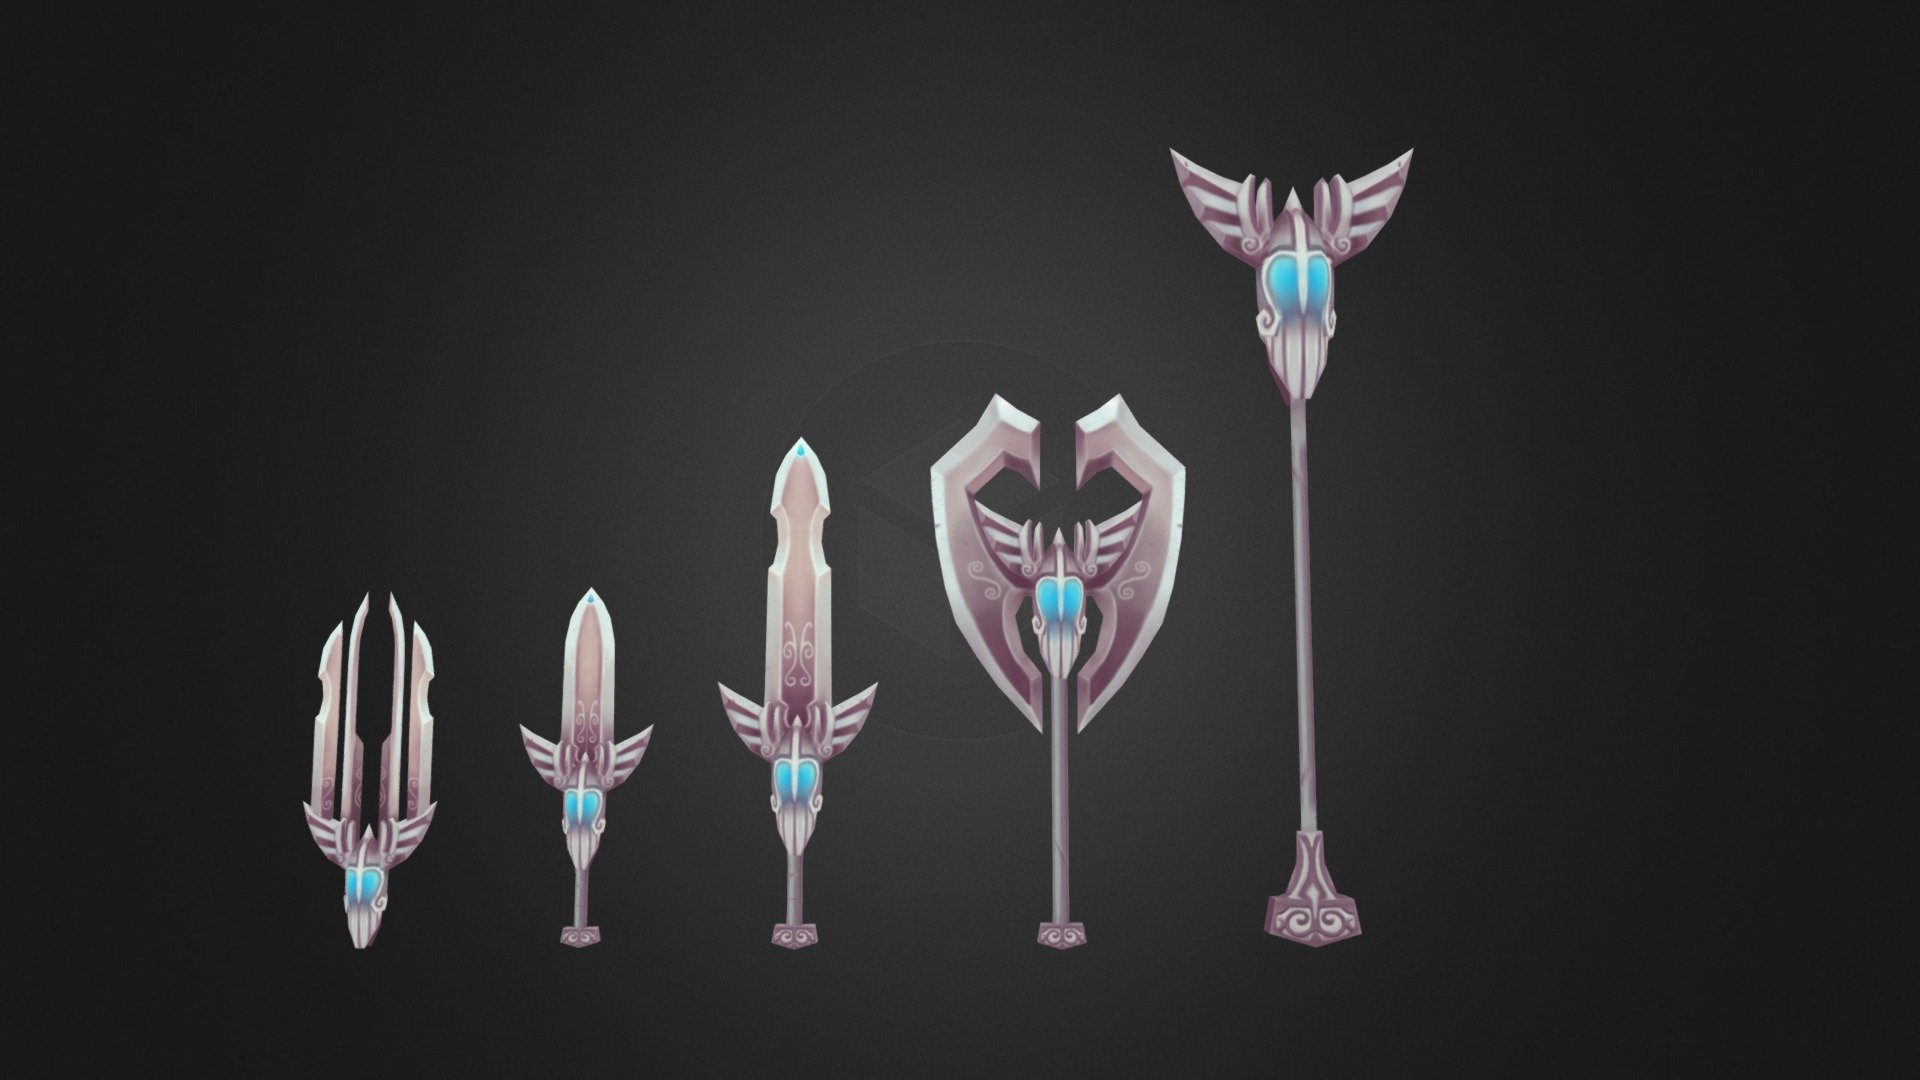 Weapons created for a small, US-based game studio - 'Thor' Weapon Set - 3D model by Tom O'Brien (@byren) 3d model